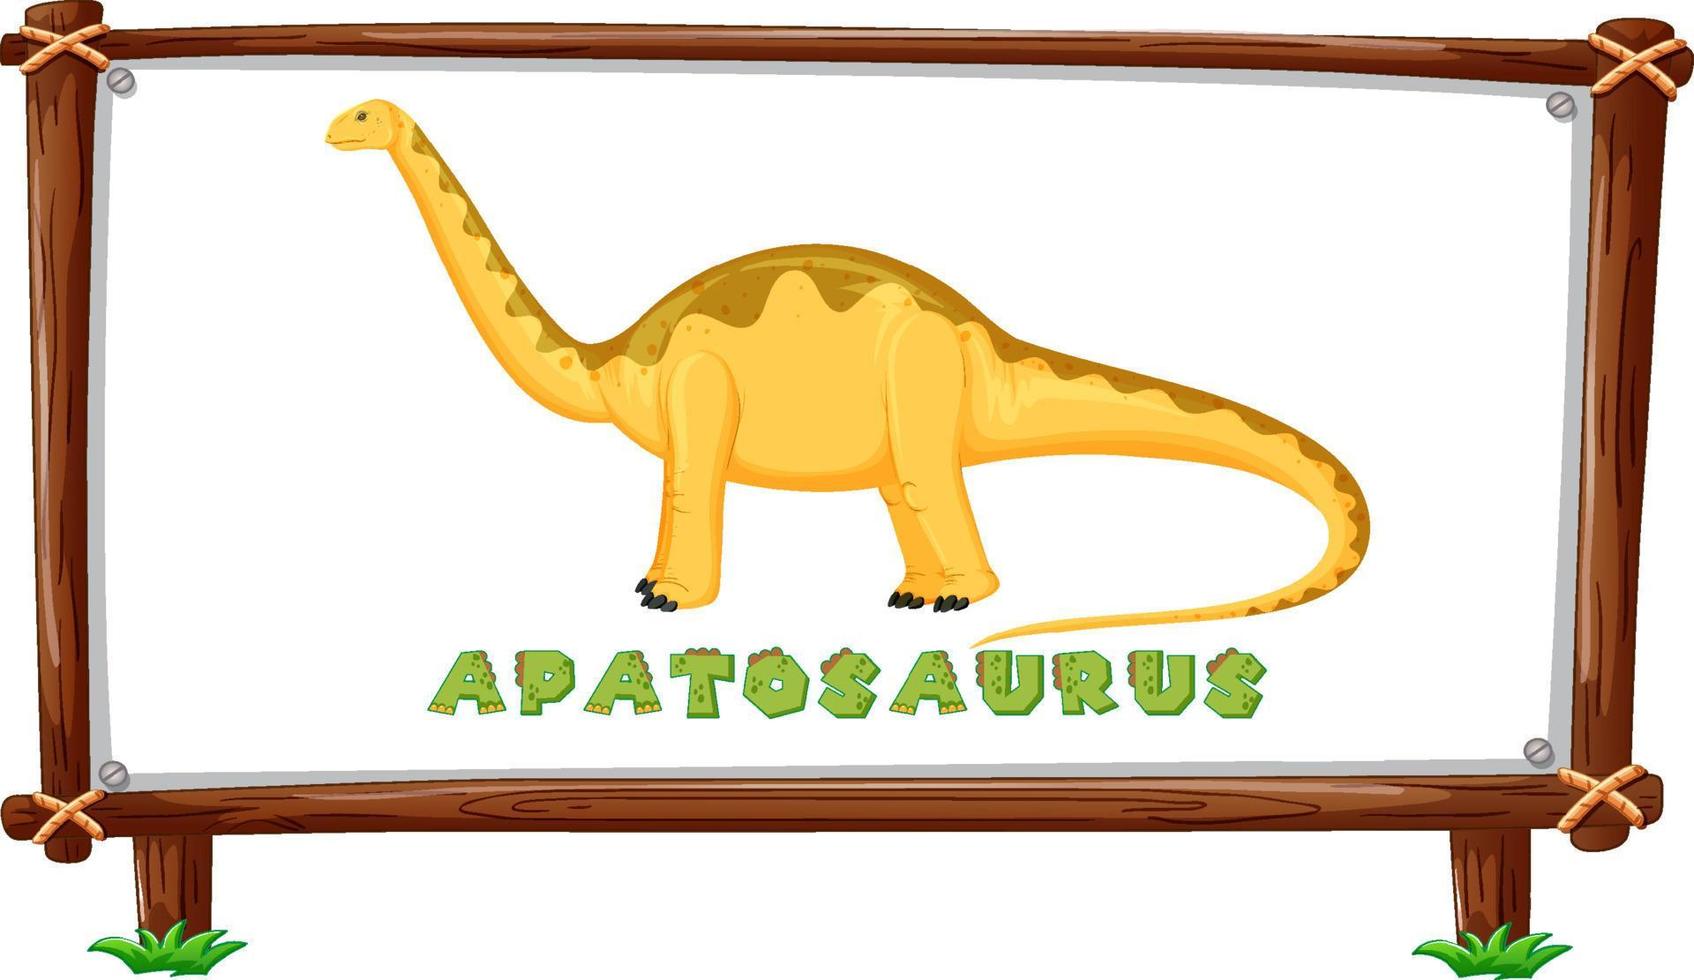 Frame template with dinosaurs and text apatosaurus design inside vector